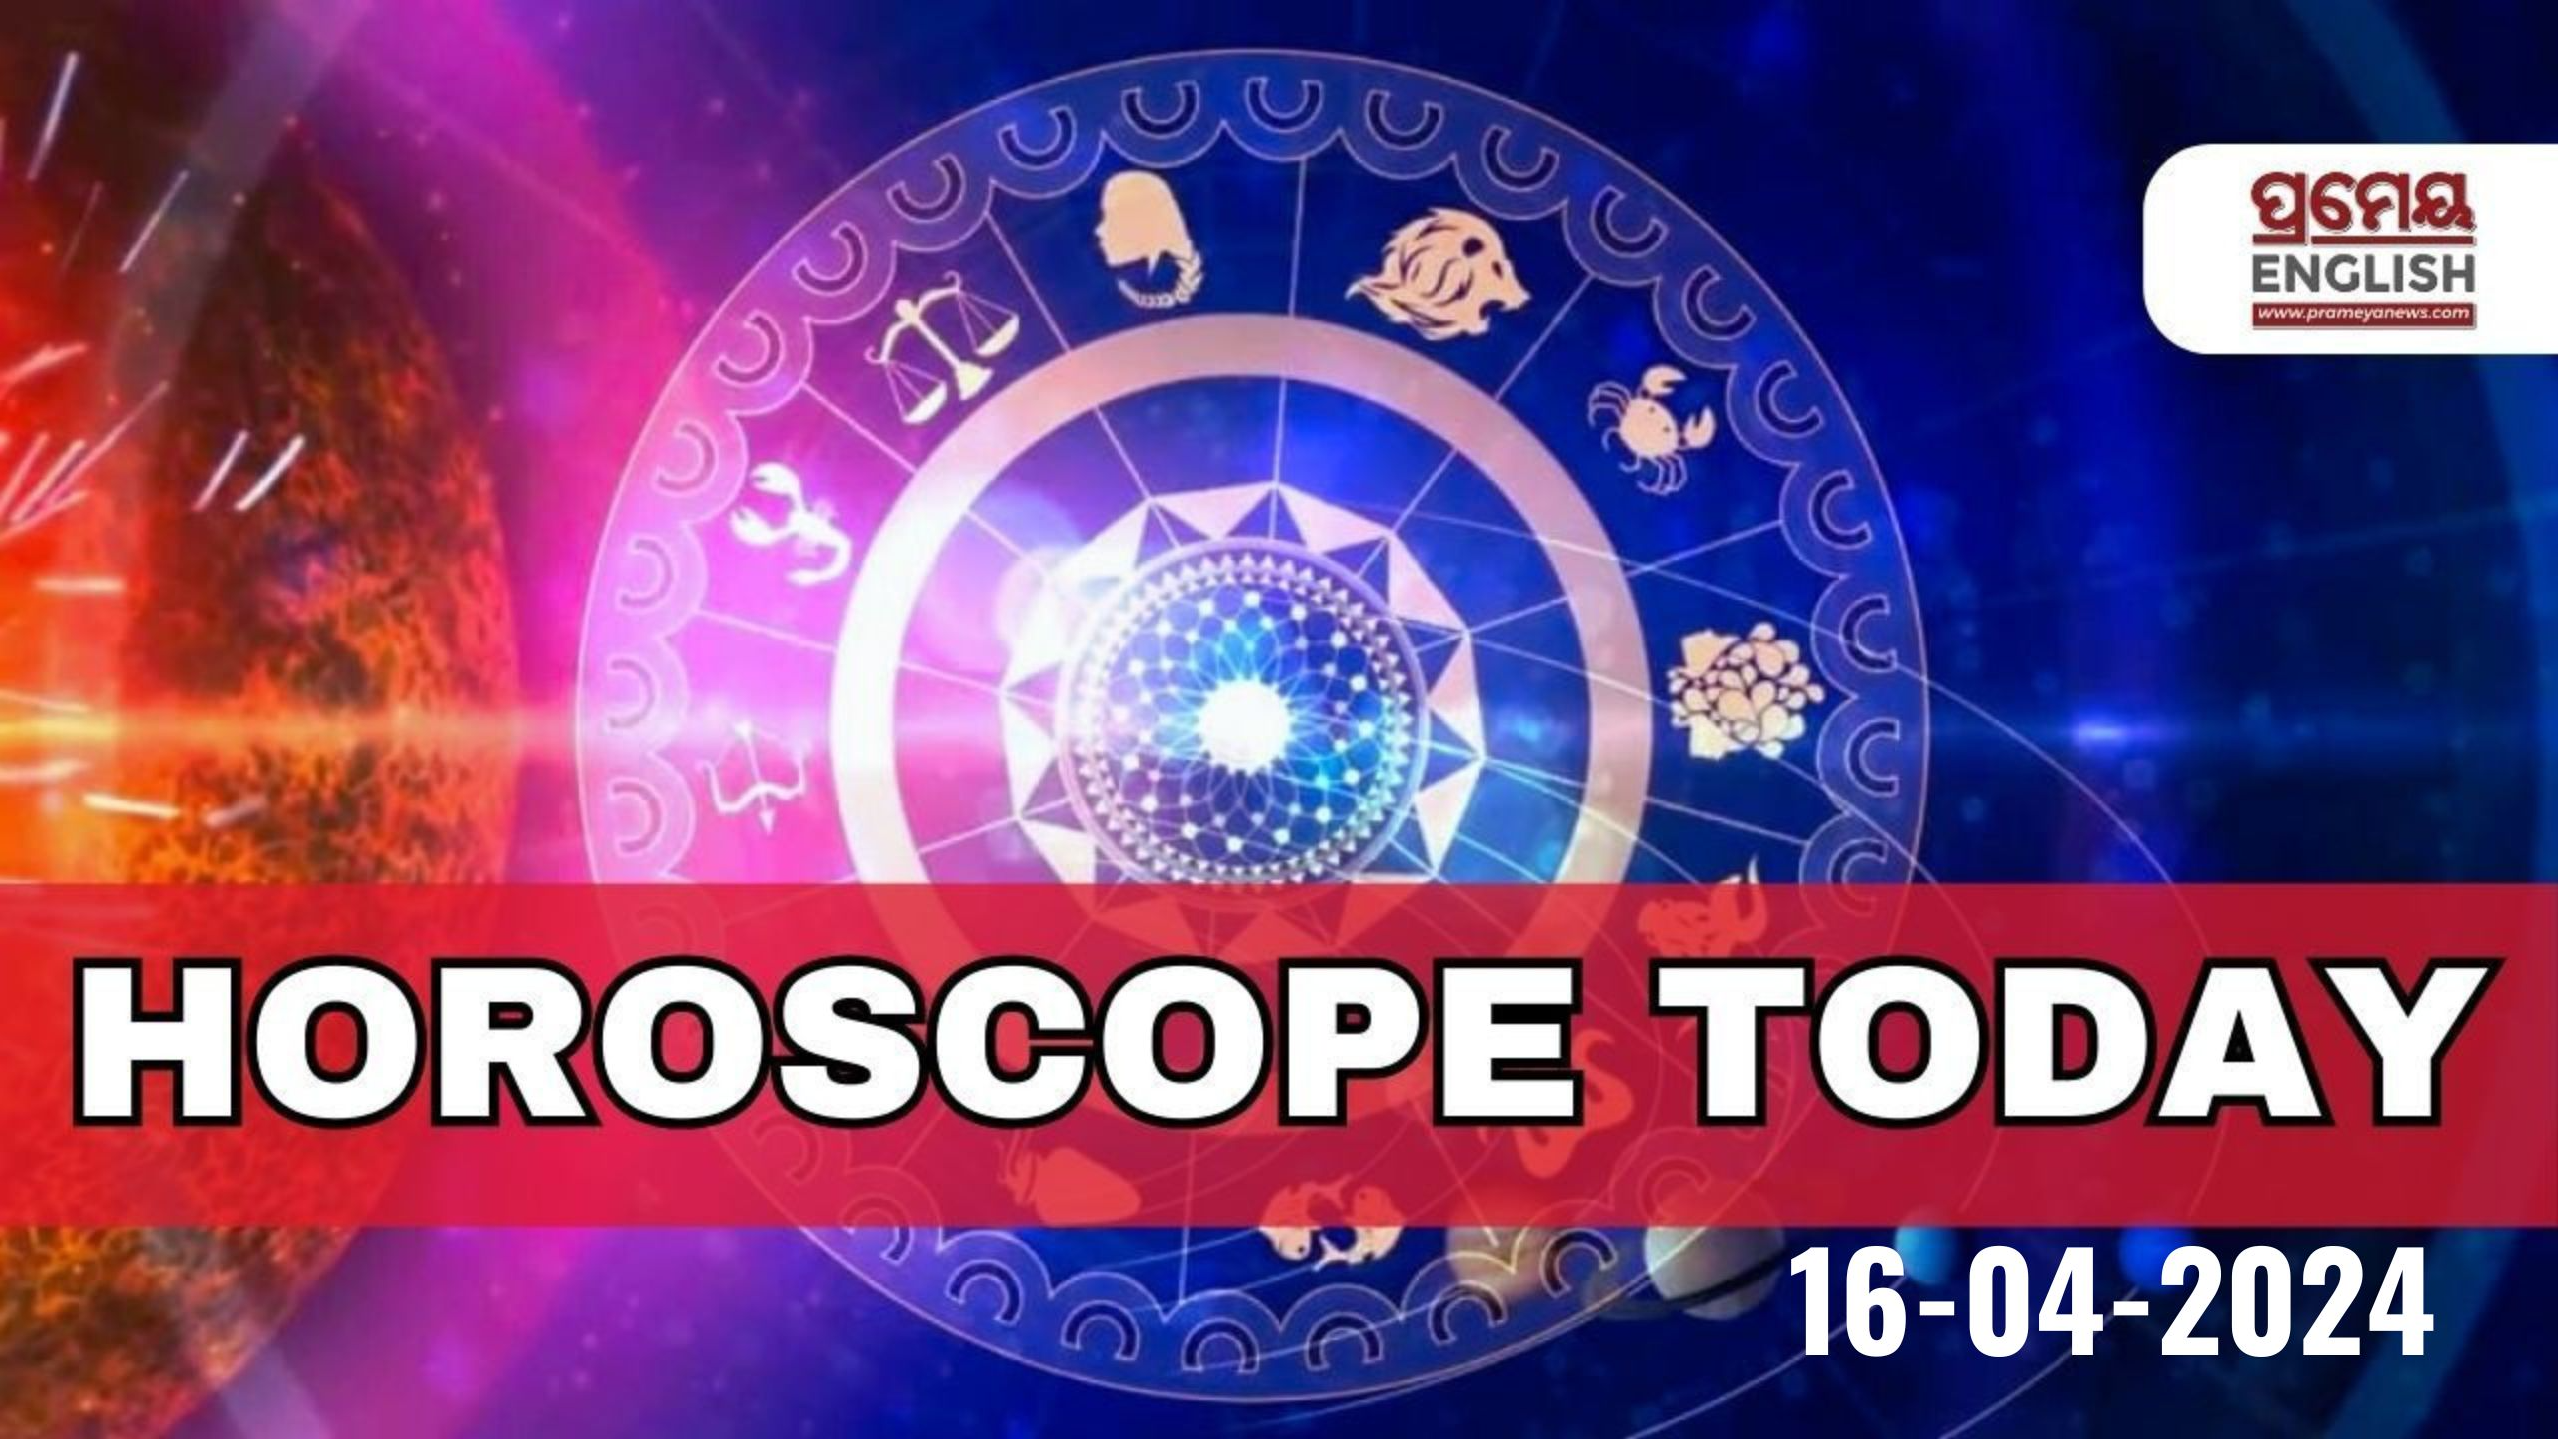 Horoscope Today: Astrological prediction for April 24, 2024